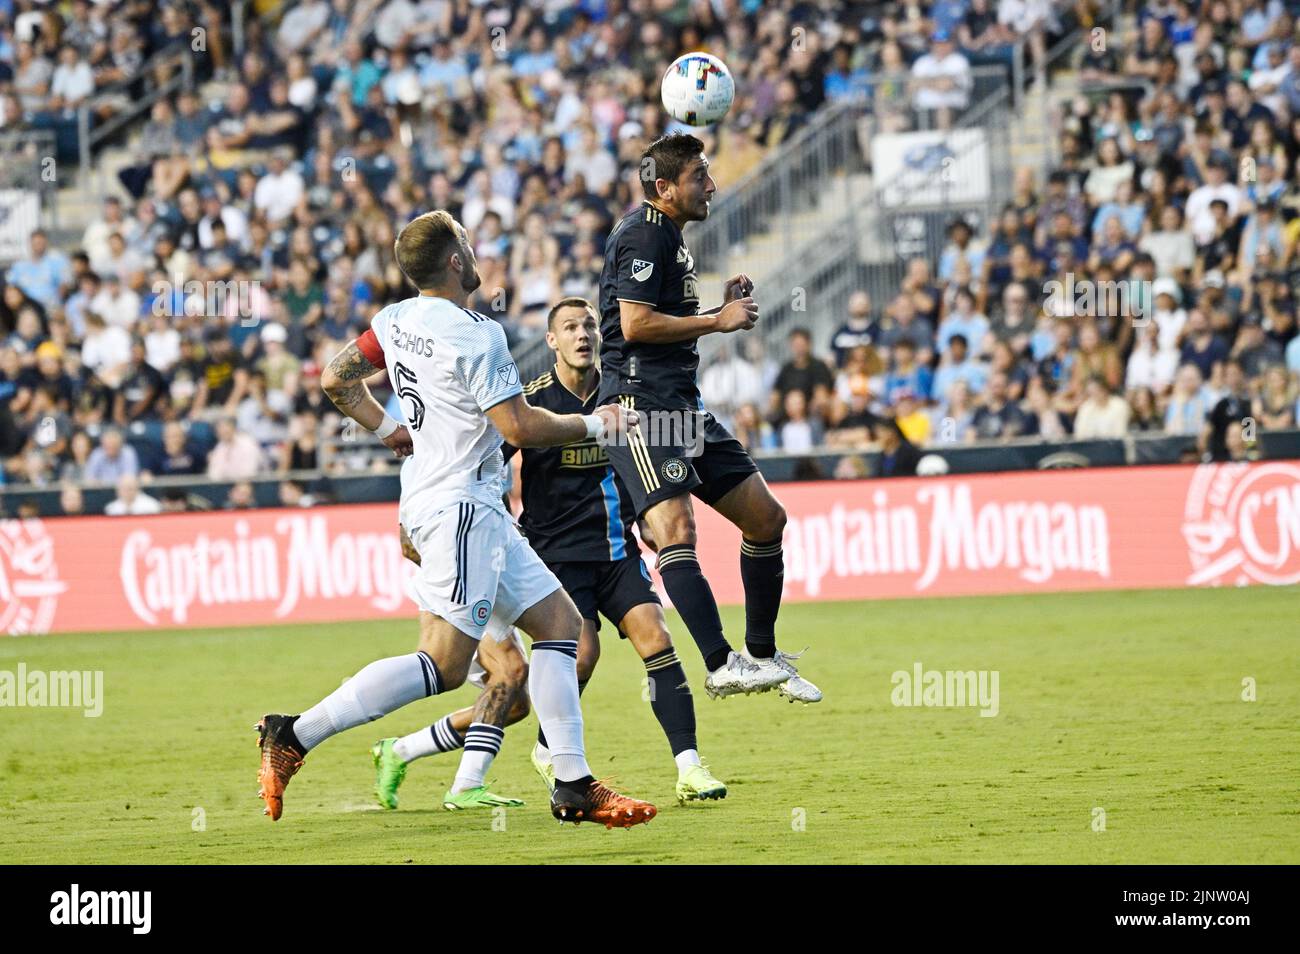 August 13, 2022: August13, 2022, Chester PA- Philadelphia Union player, ALEJANDRO BEDOYA (11) jumps for a header against the  Chicago Fire during the match at Subaru Park in Chester PA (Credit Image: © Ricky Fitchett/ZUMA Press Wire) Stock Photo